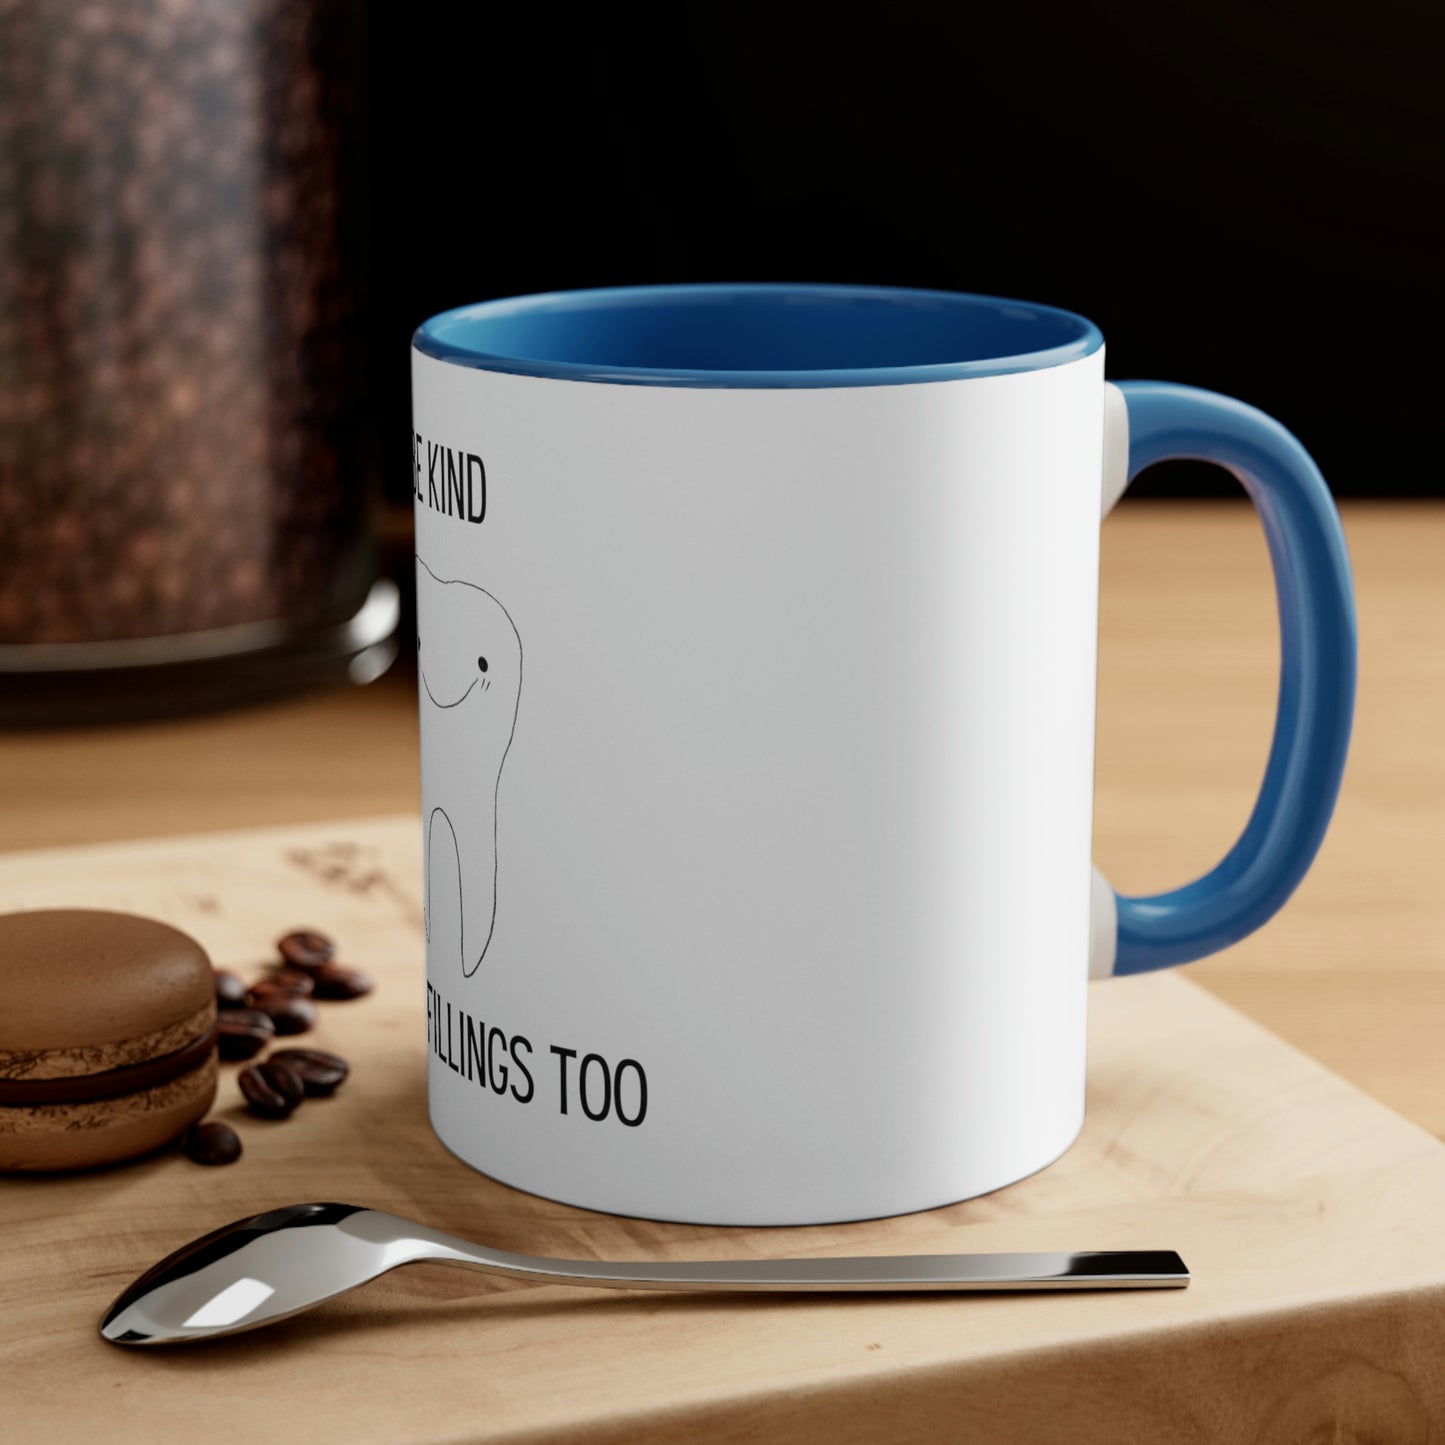 Be Kind...I Have Fillings Too!  Accent Coffee Mug, 11oz, 5 colors available